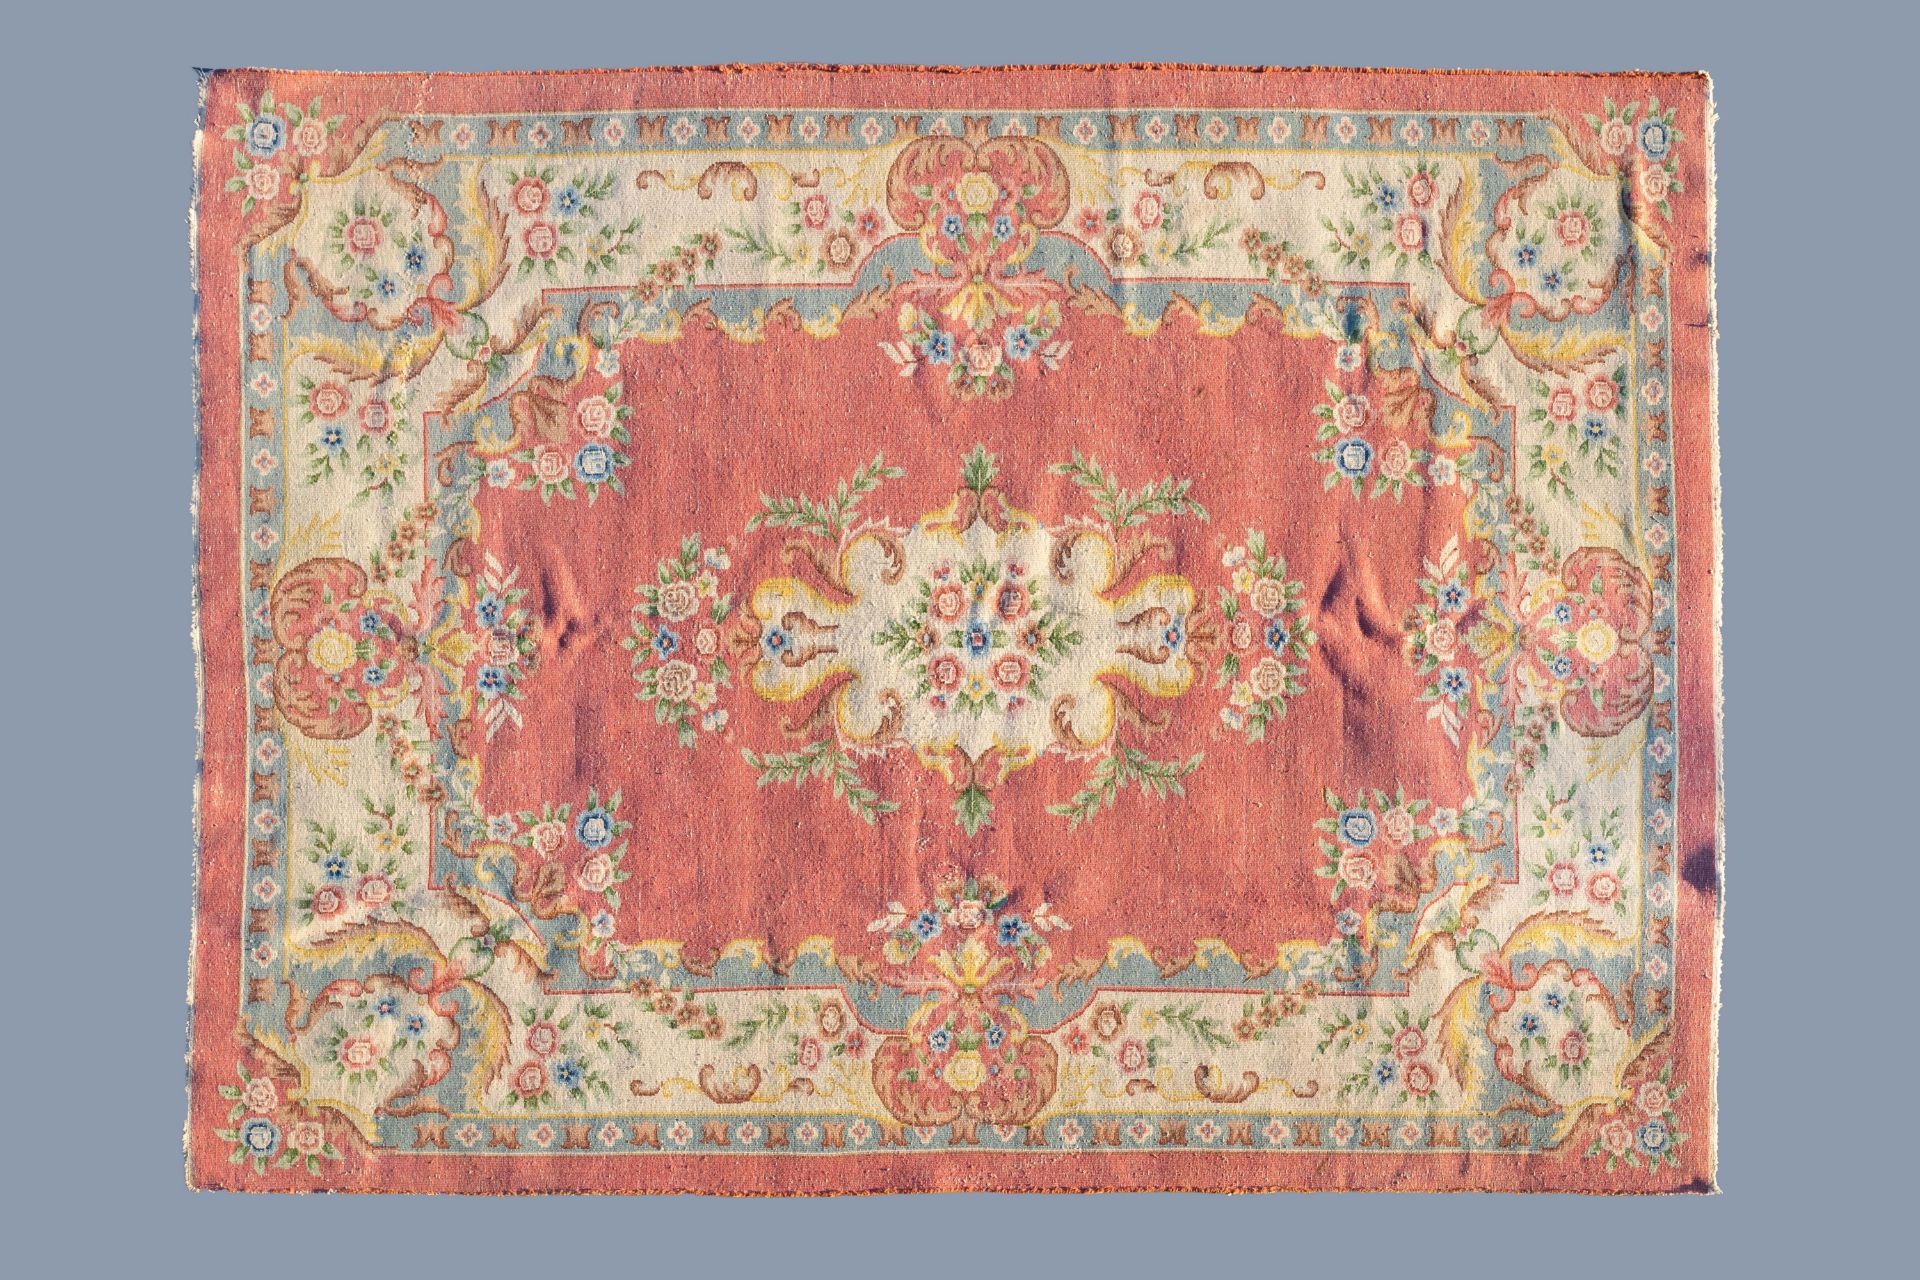 A French woolen Aubusson rug with floral design, 20th C. - Image 2 of 3